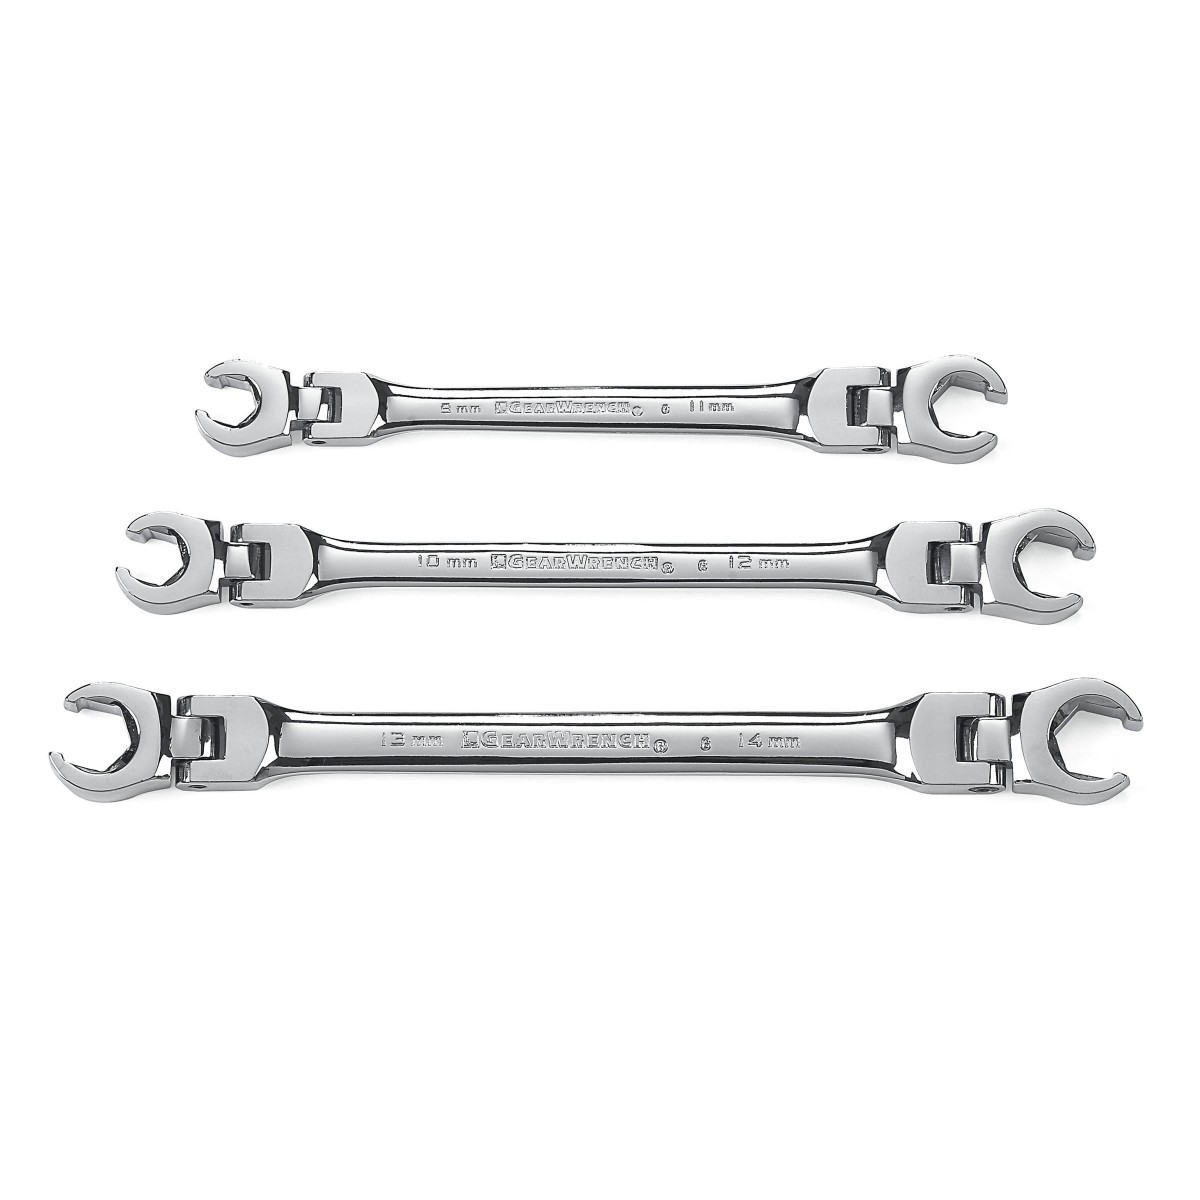 GEARWRENCH 81915 3 Pc. Flex Head Flare Nut Metric Wrench Set